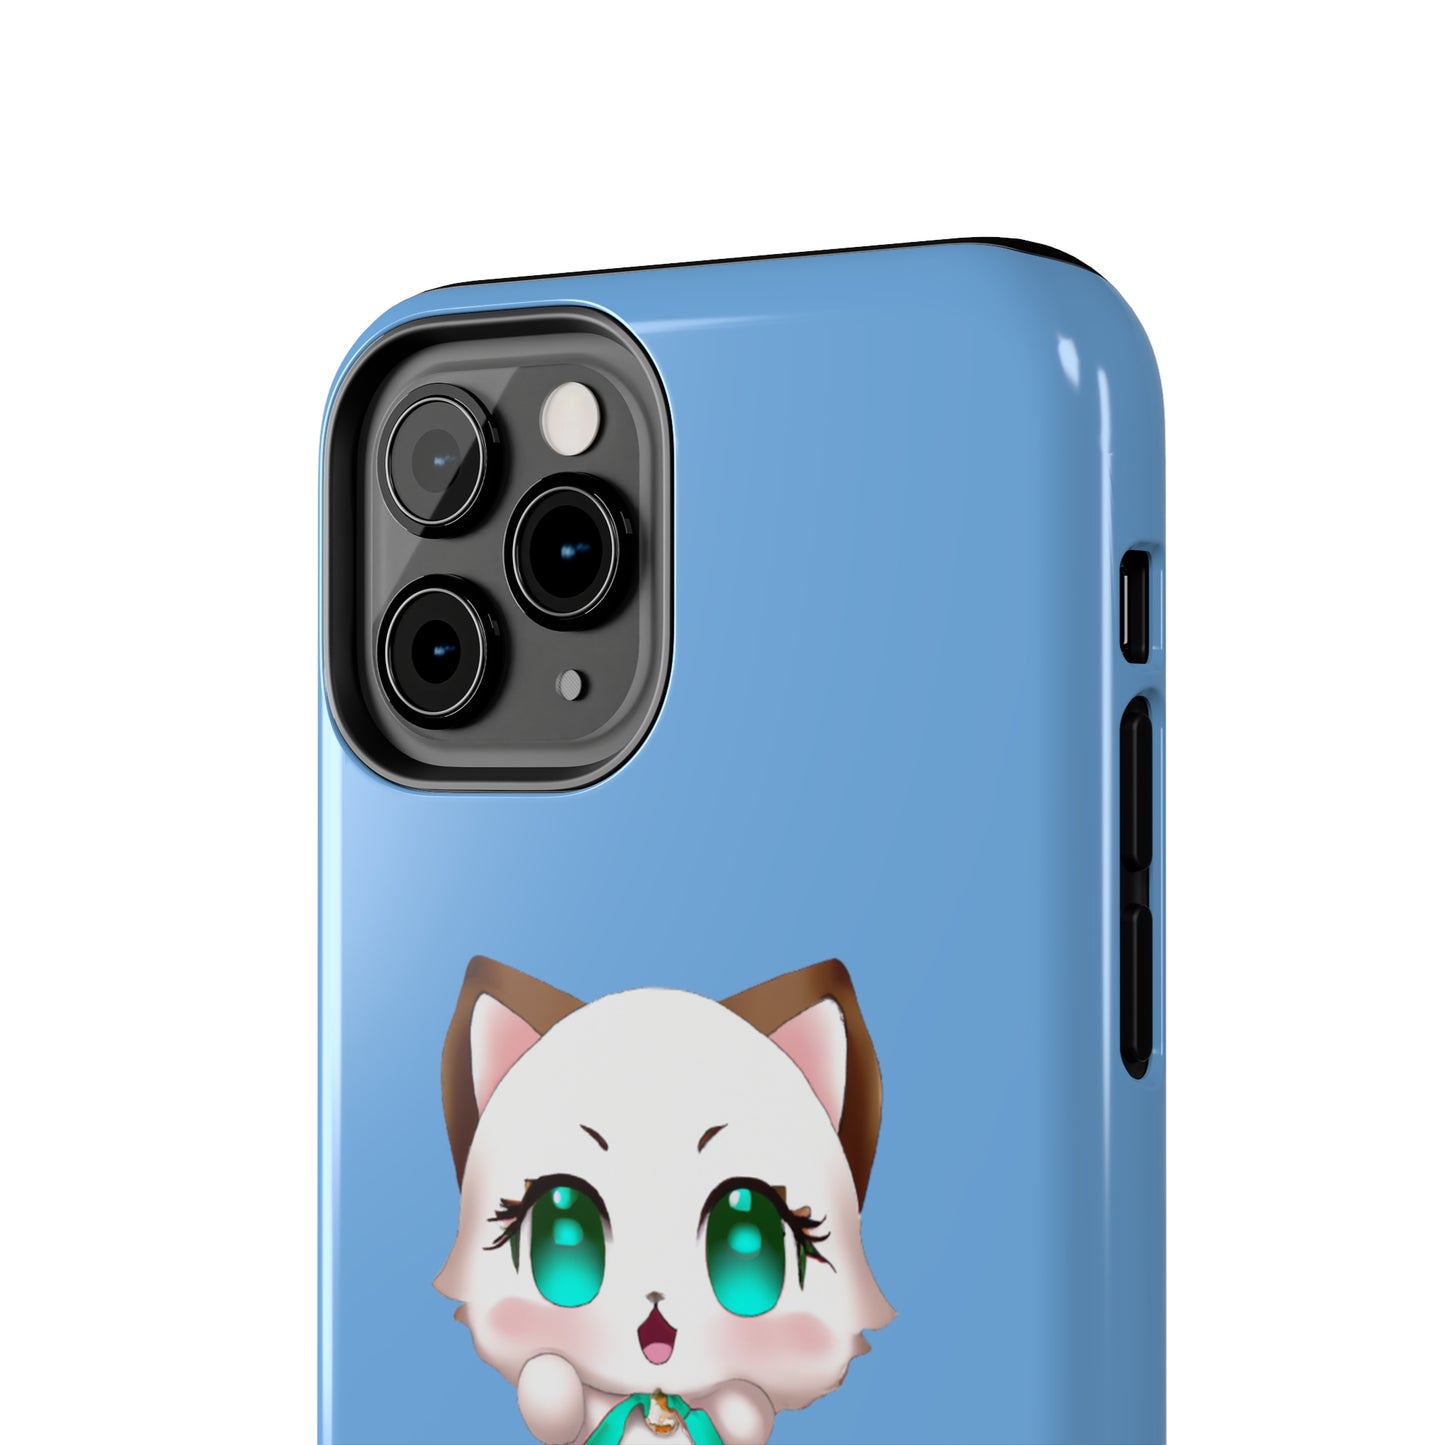 Tough Apple iPhone Cases Ft. Cute Kitty